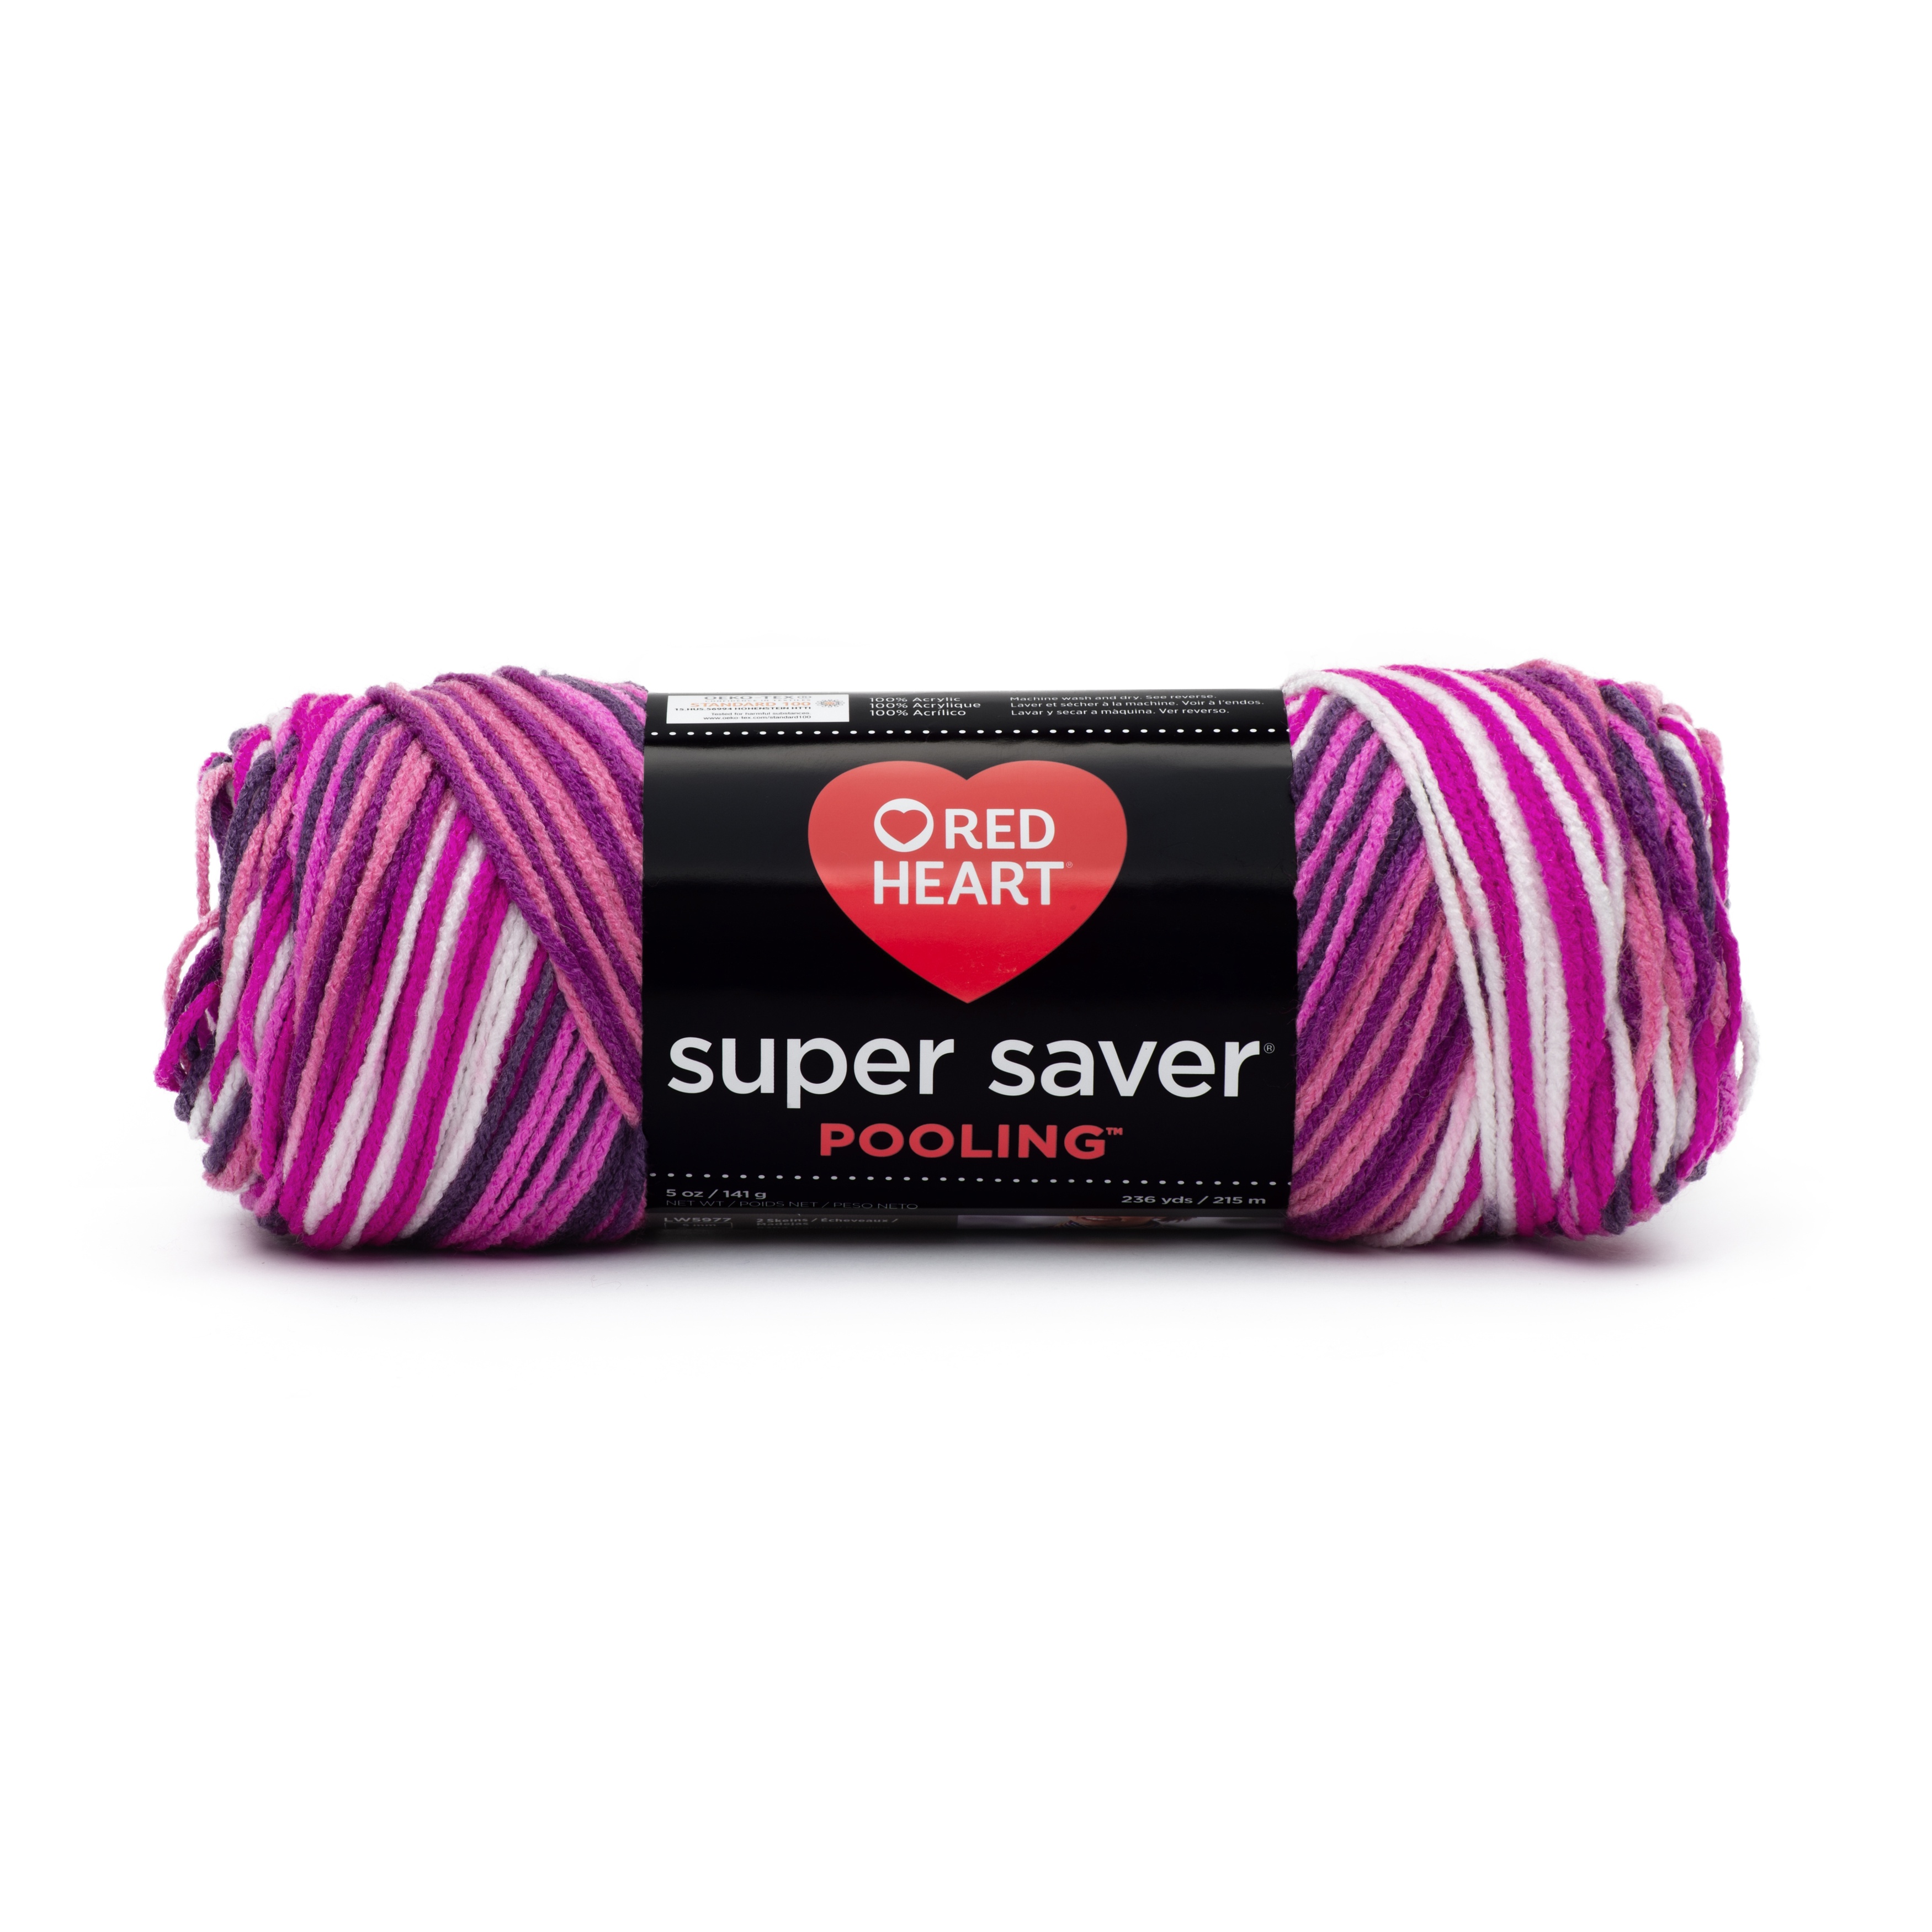 Red Heart Super Ranking TOP1 Saver Berry Yarn. High material Pooling